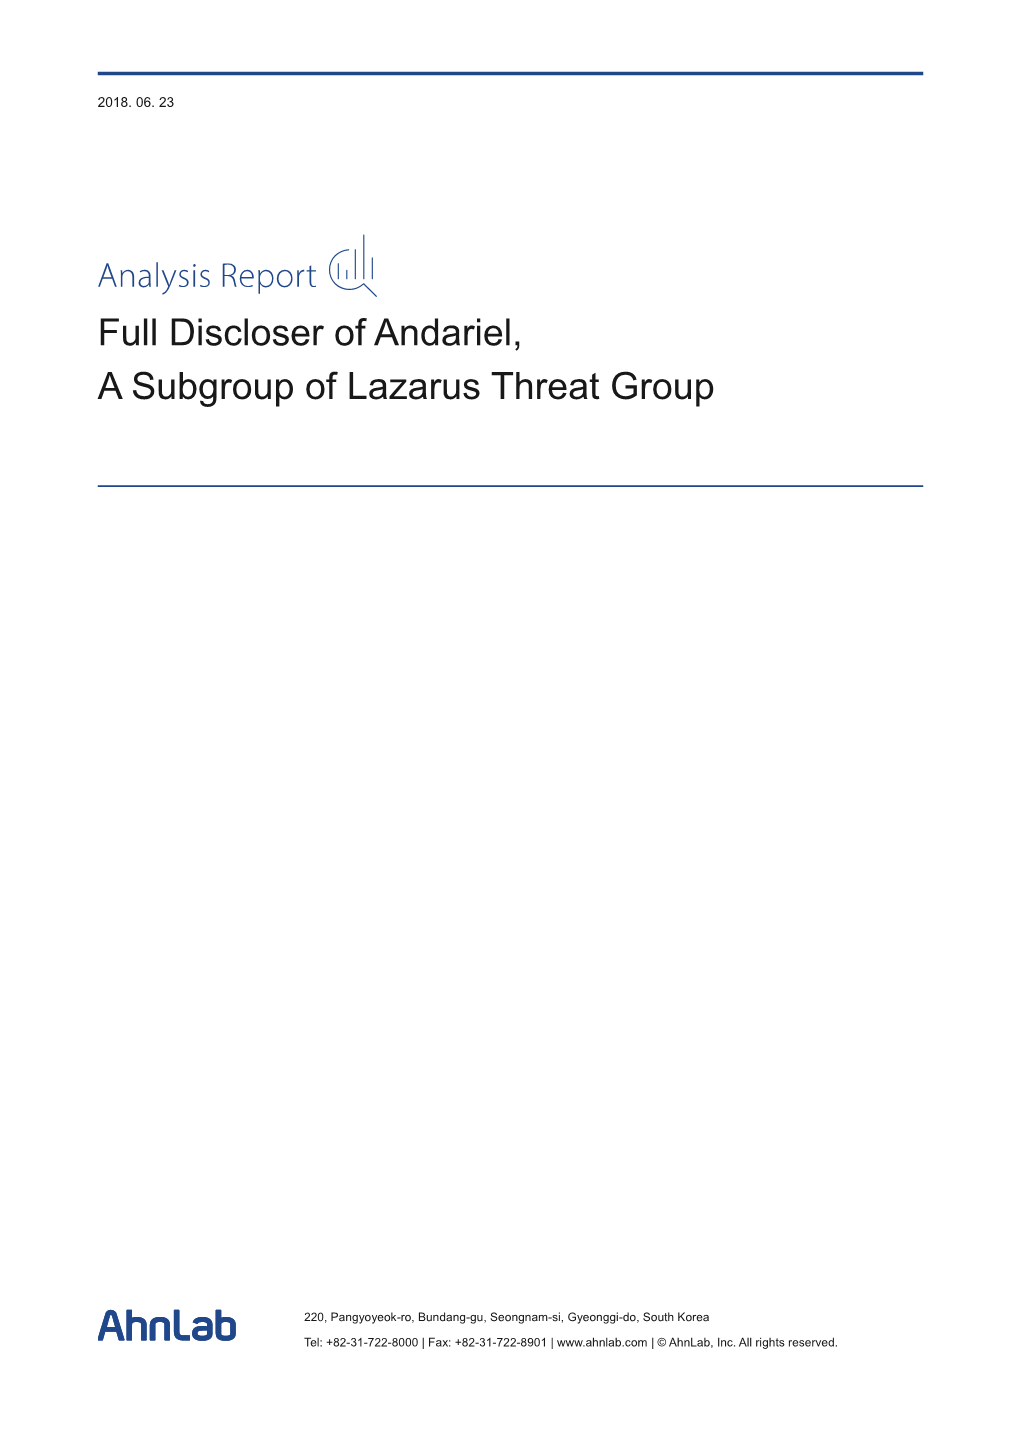 Full Discloser of Andariel, a Subgroup of Lazarus Threat Group